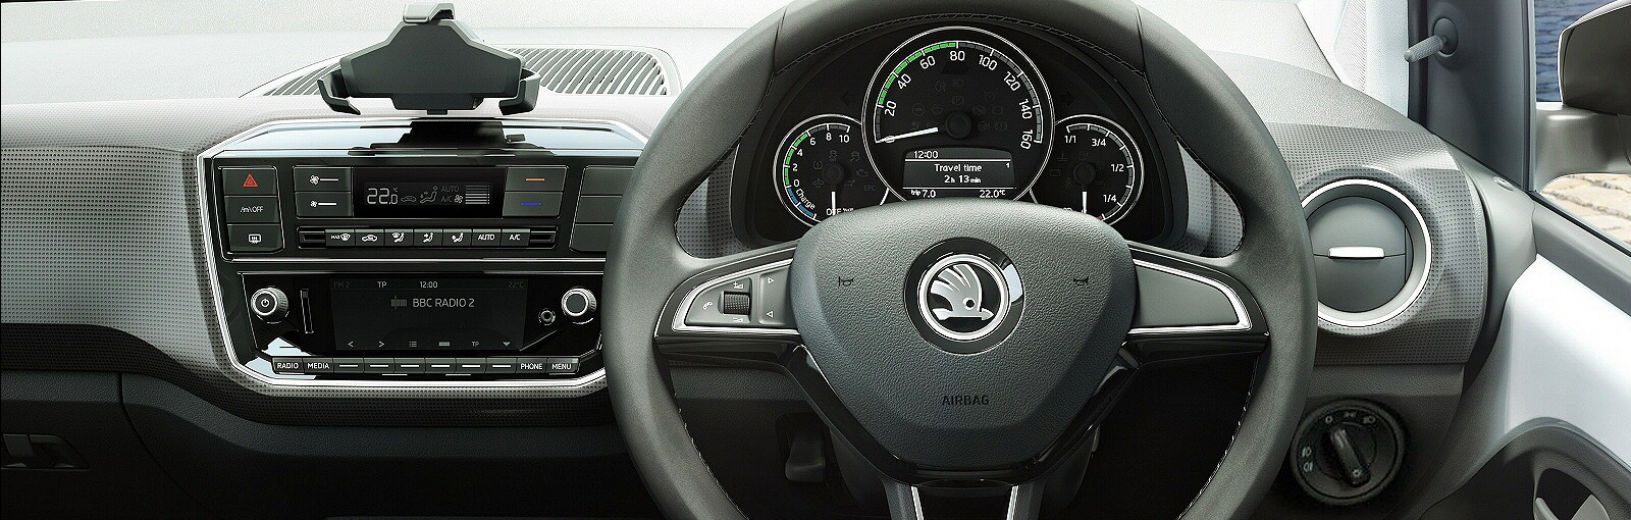 Skoda warning – what they mean RAC Drive